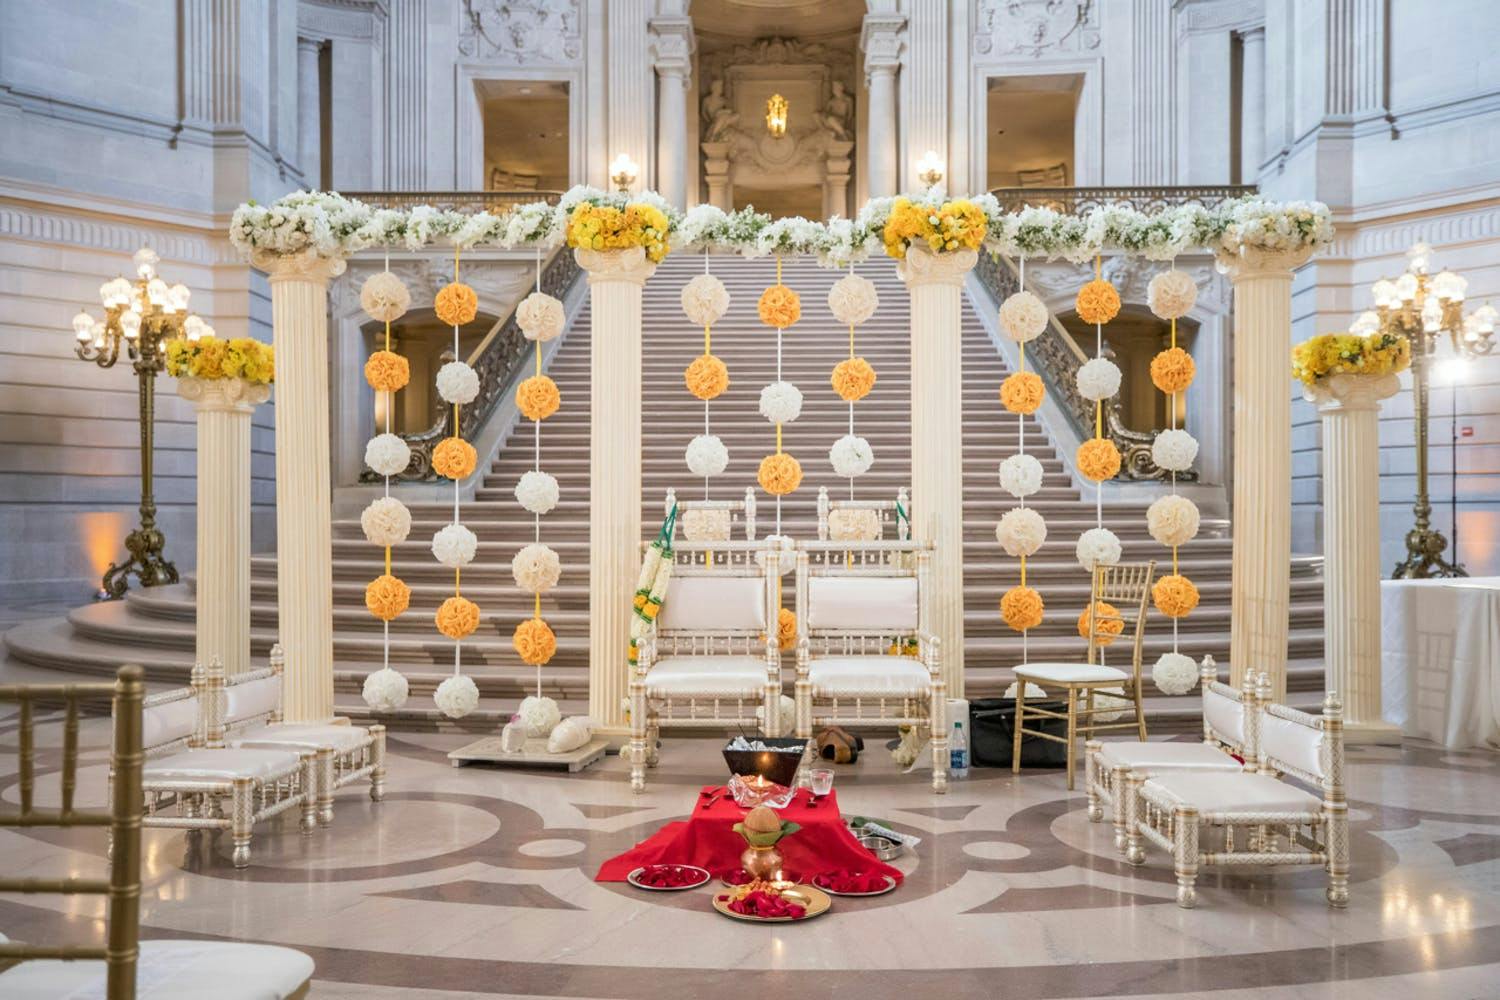 Unique Wedding Ceremony Backdrop with Yellow and White Rose Pom-Poms | PartySlate